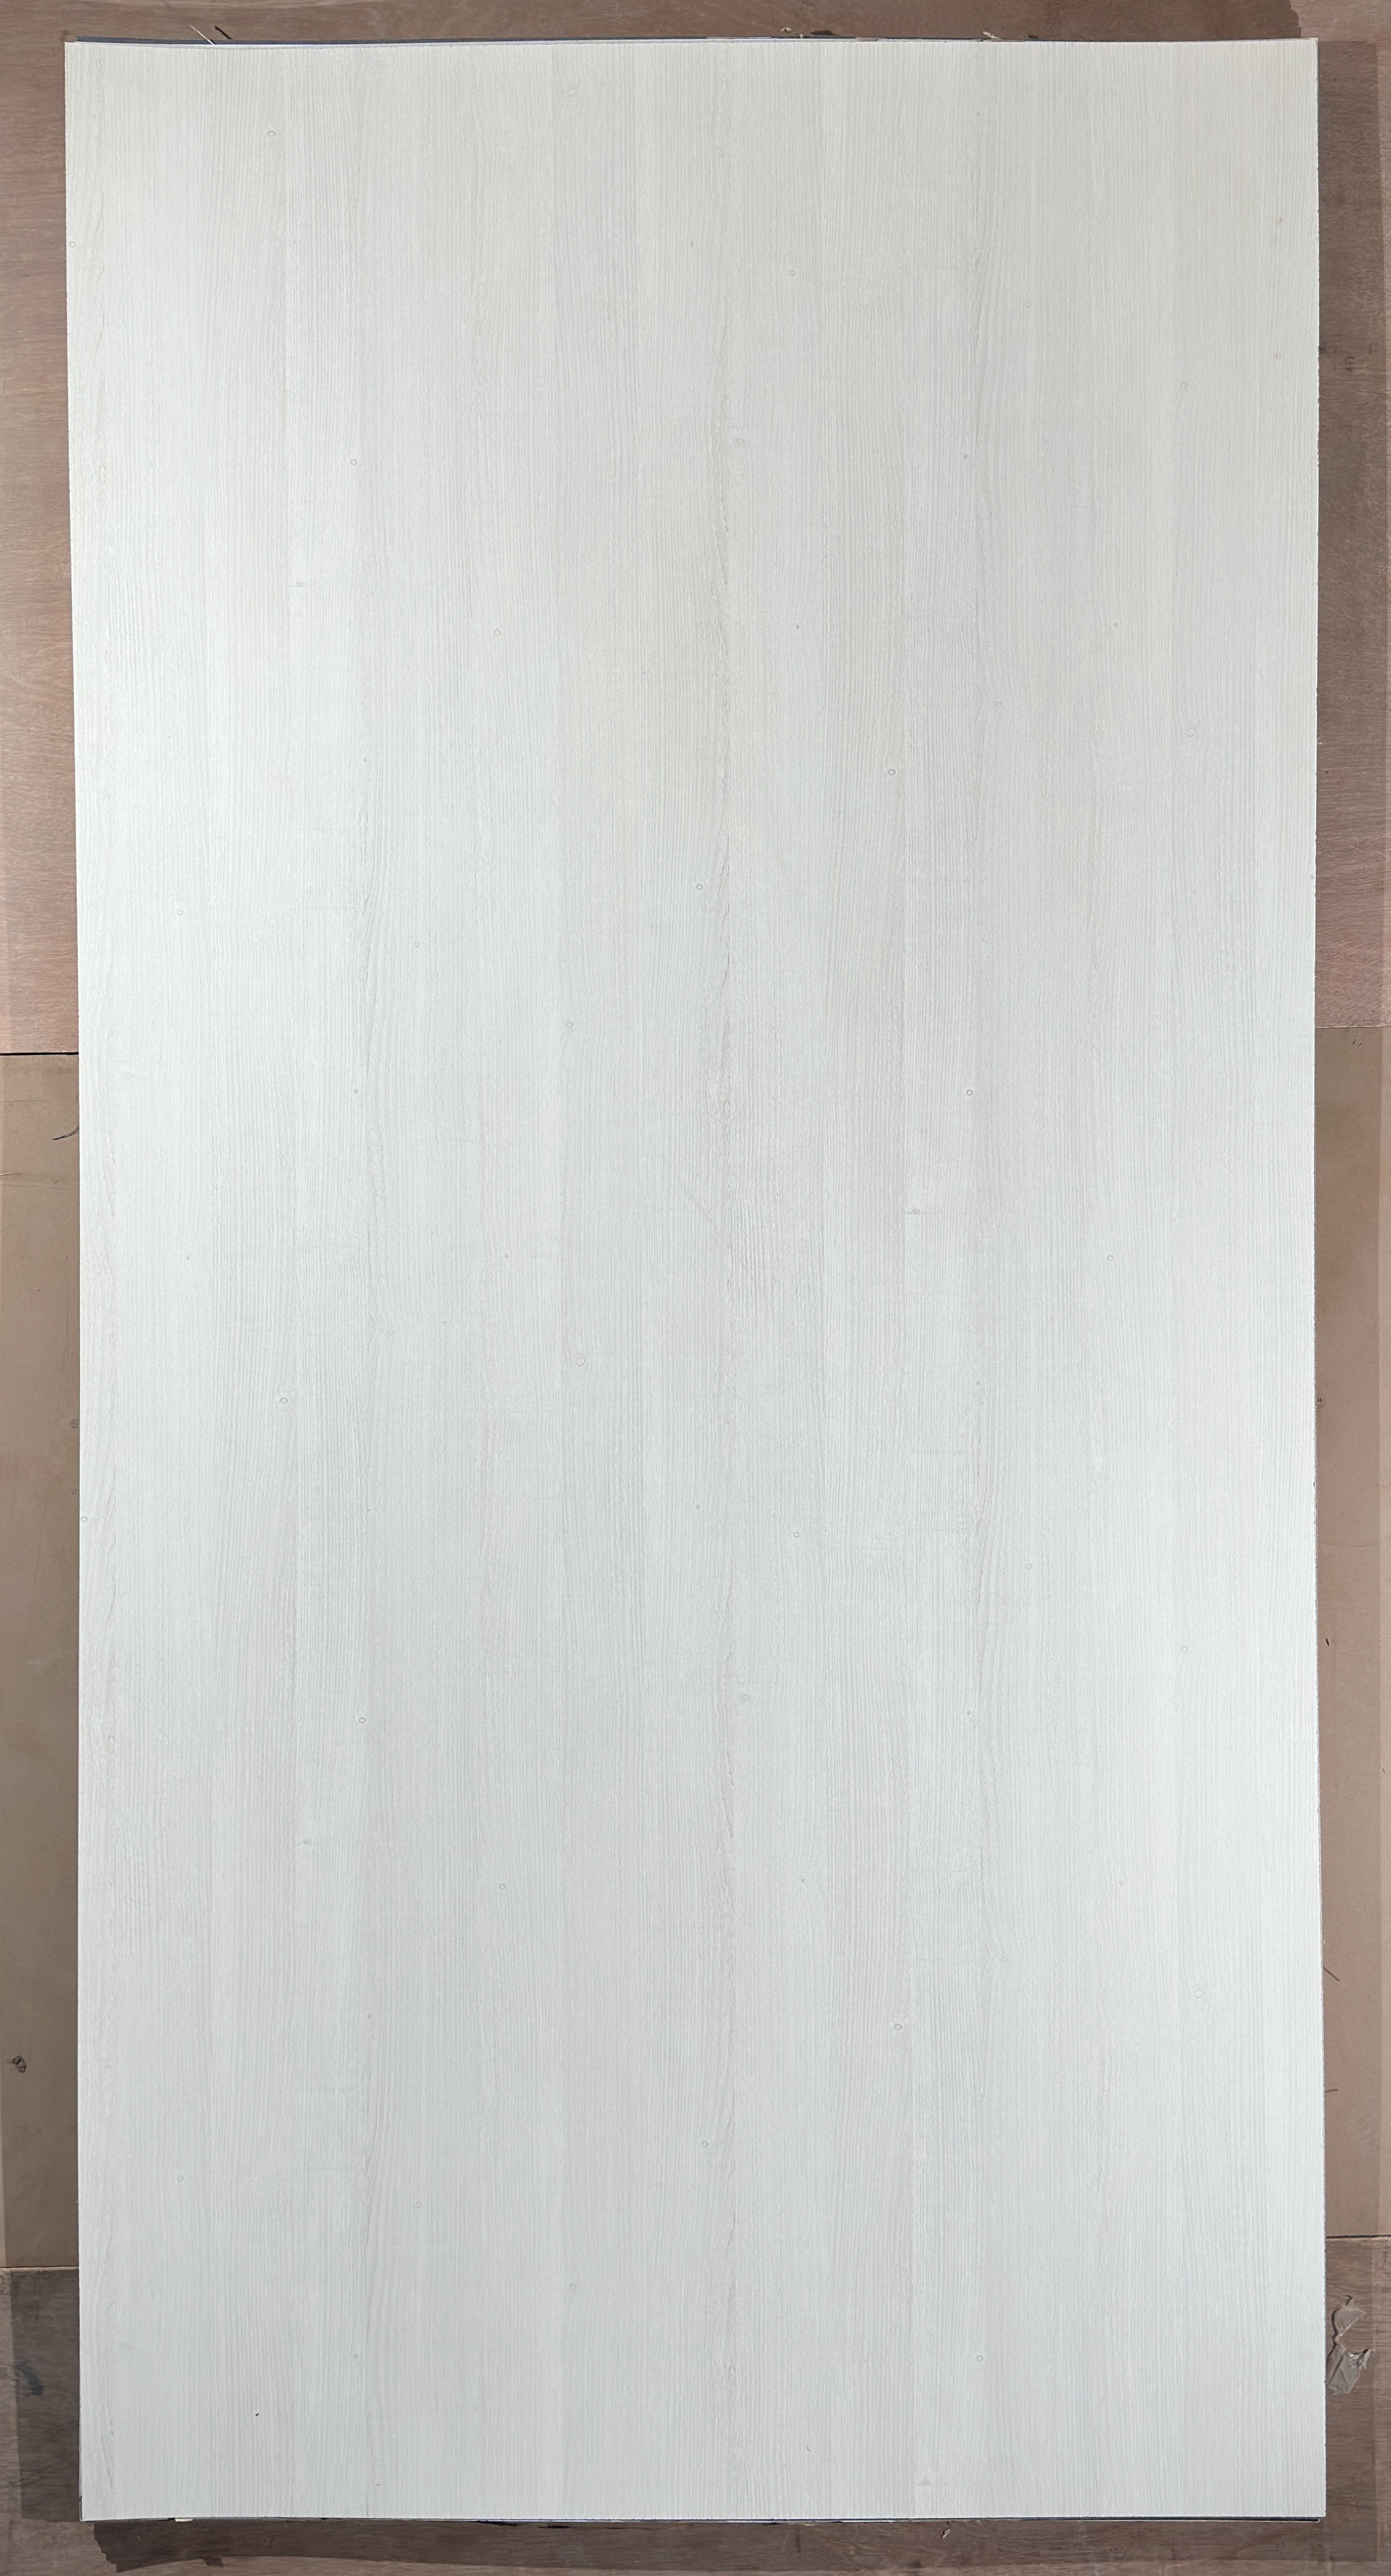 A close-up of a White 87066 VN with a Texture finish Decorative Laminate available at Material Depot in Bangalore